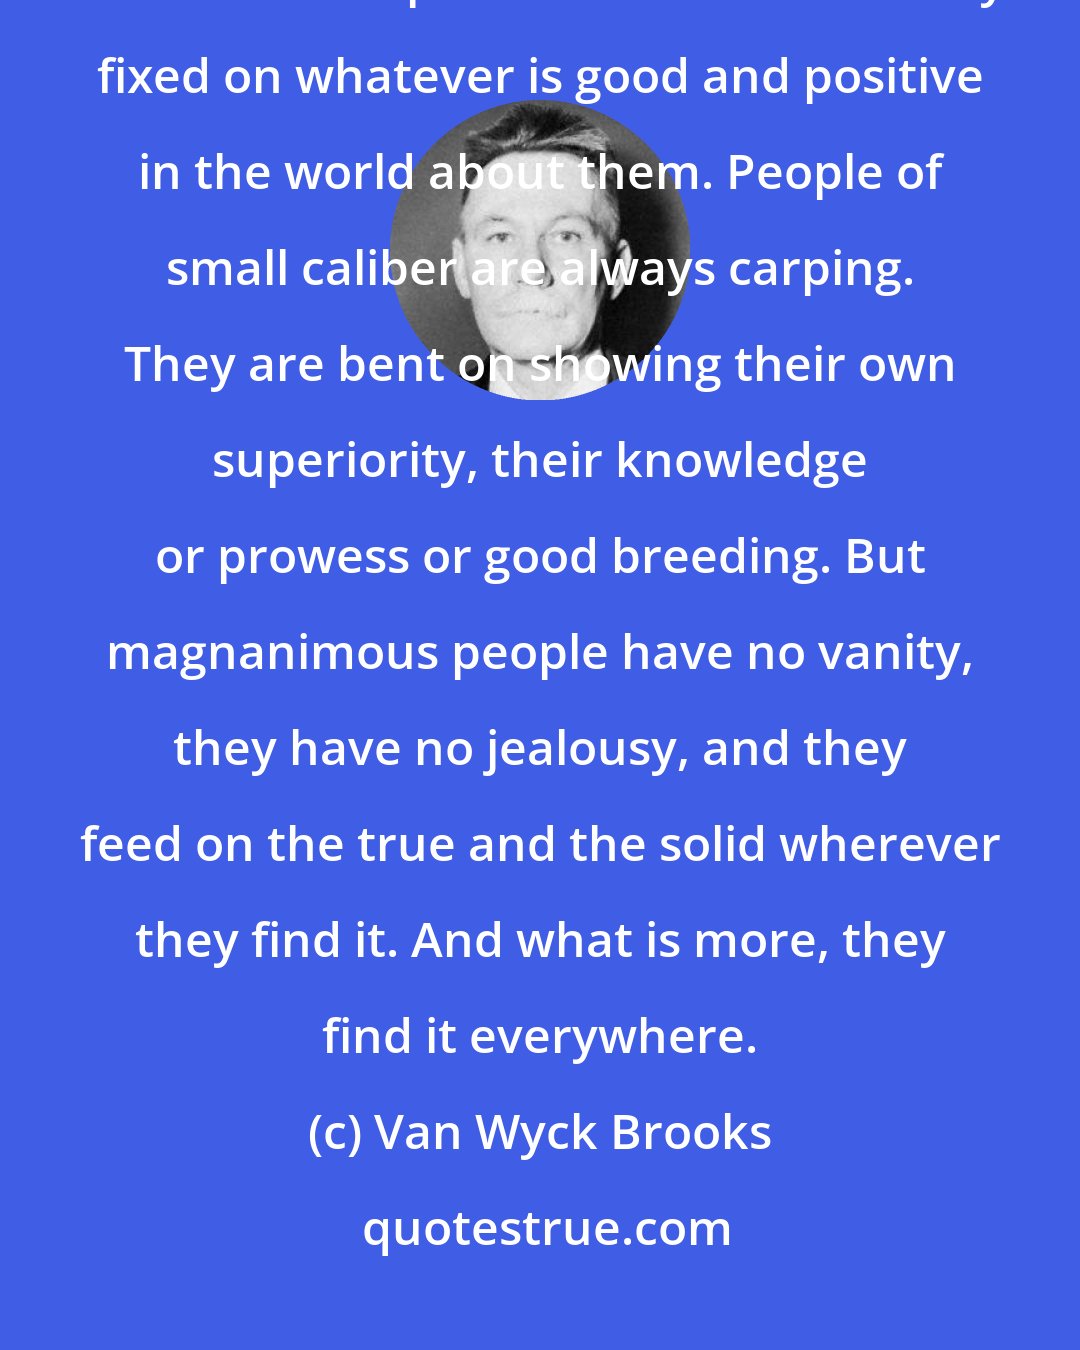 Van Wyck Brooks: How delightful is the company of generous people, who overlook trifles and keep their minds instinctively fixed on whatever is good and positive in the world about them. People of small caliber are always carping. They are bent on showing their own superiority, their knowledge or prowess or good breeding. But magnanimous people have no vanity, they have no jealousy, and they feed on the true and the solid wherever they find it. And what is more, they find it everywhere.